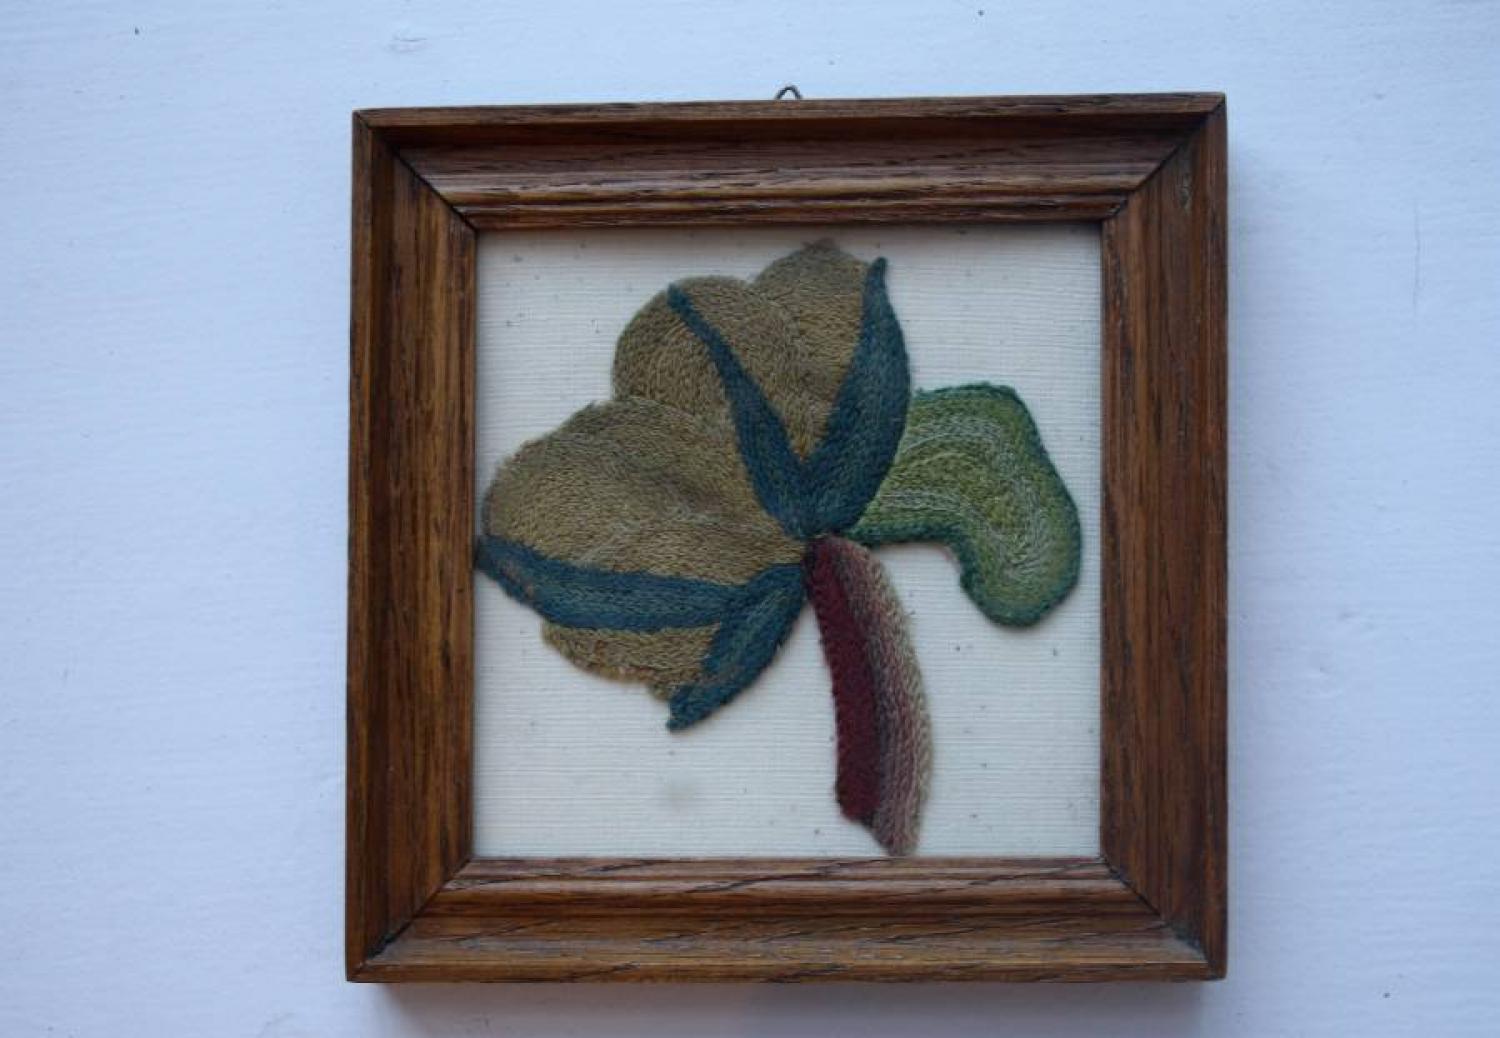 Early embroidery in frame